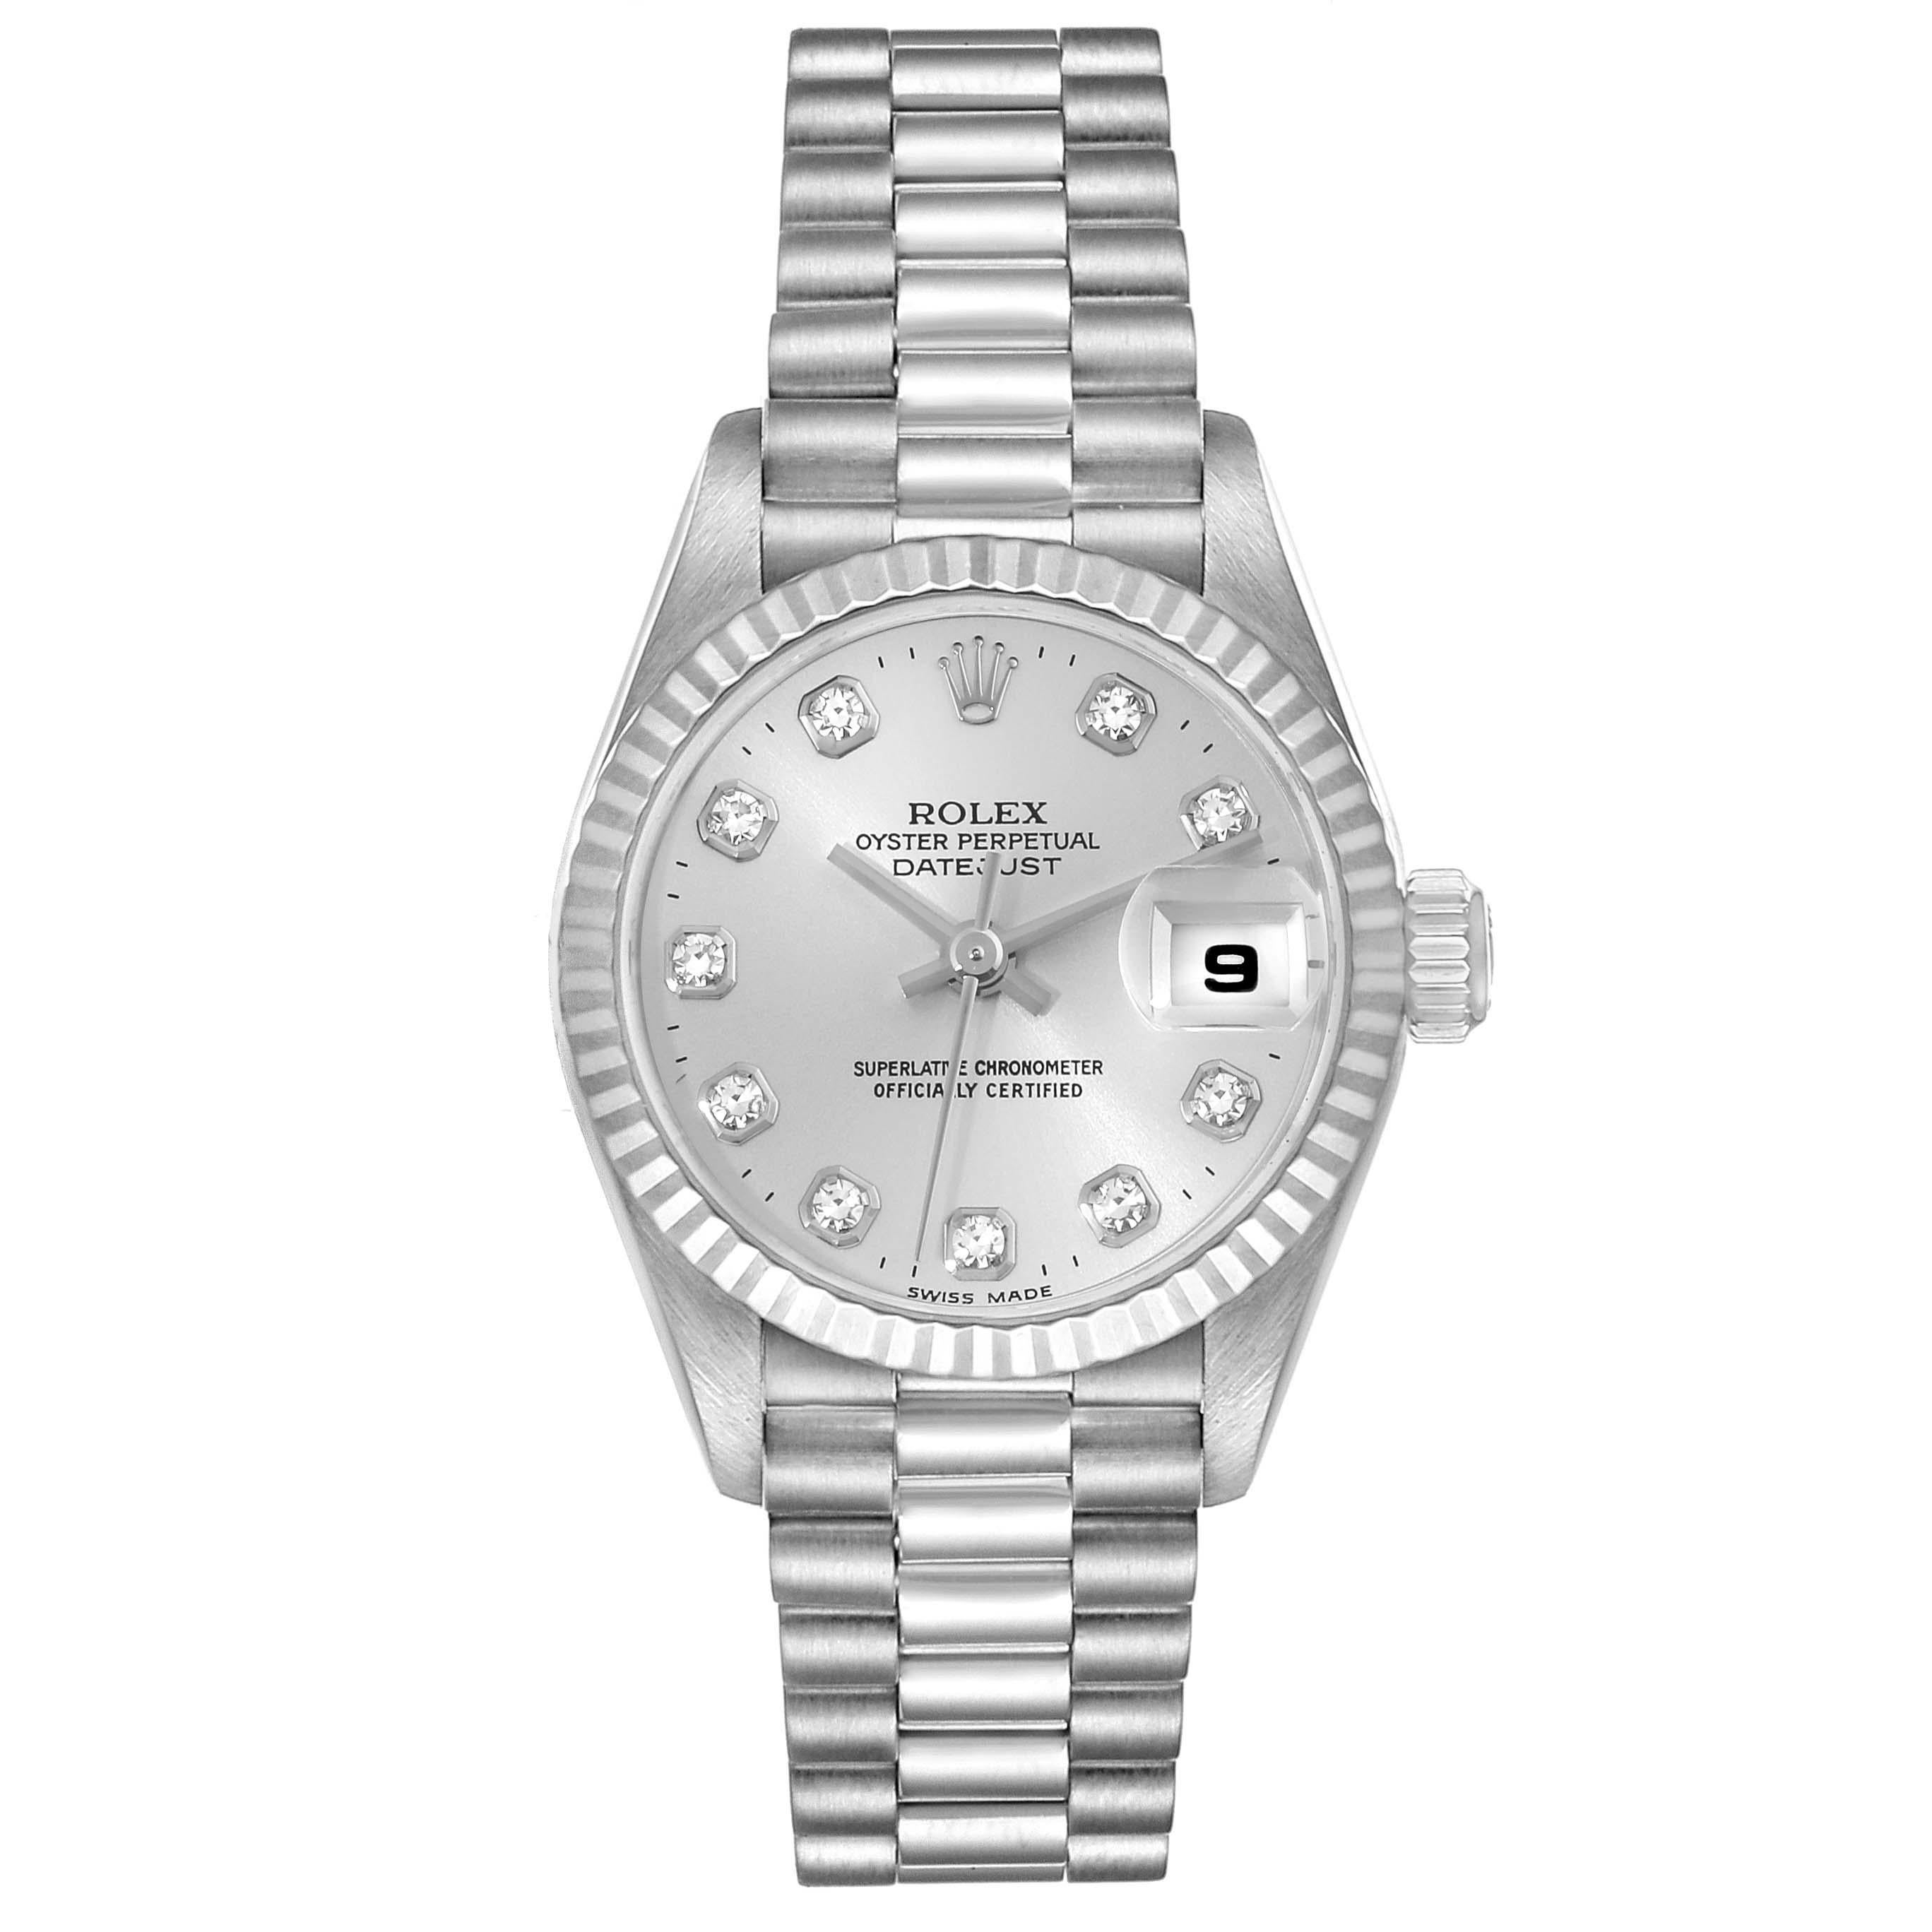 Rolex President White Gold Diamond Dial Ladies Watch 79179 Box Papers. Officially certified chronometer self-winding movement. 18k white gold oyster case 26.0 mm in diameter. Rolex logo on a crown. 18k white gold fluted bezel. Scratch resistant